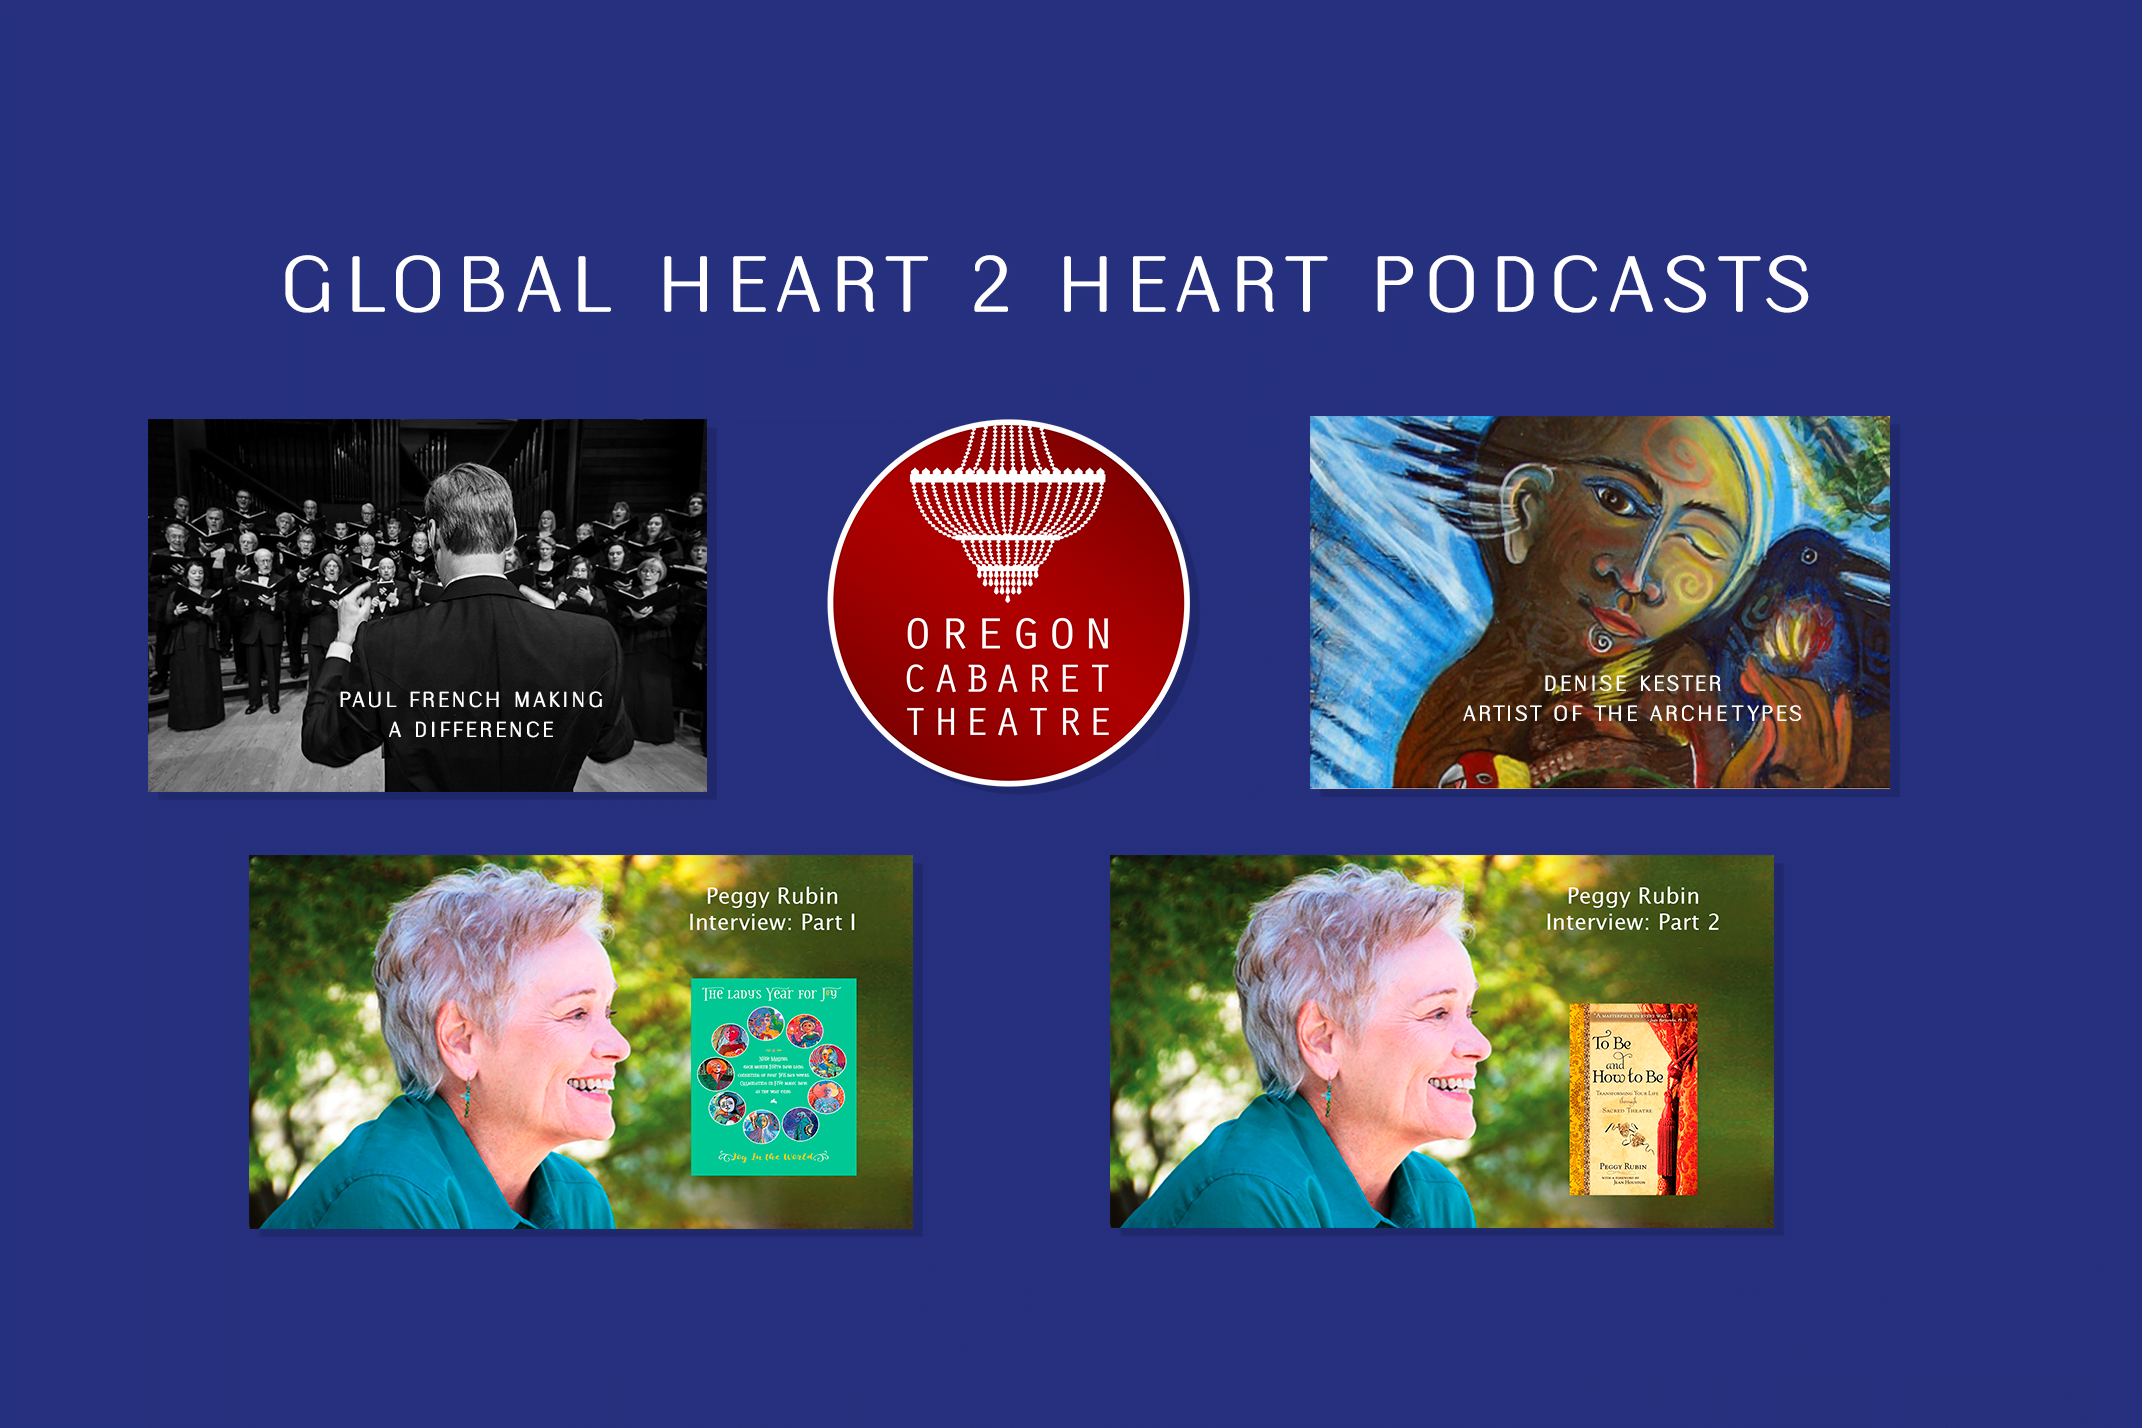 Global Heart 2 Heart Podcasts